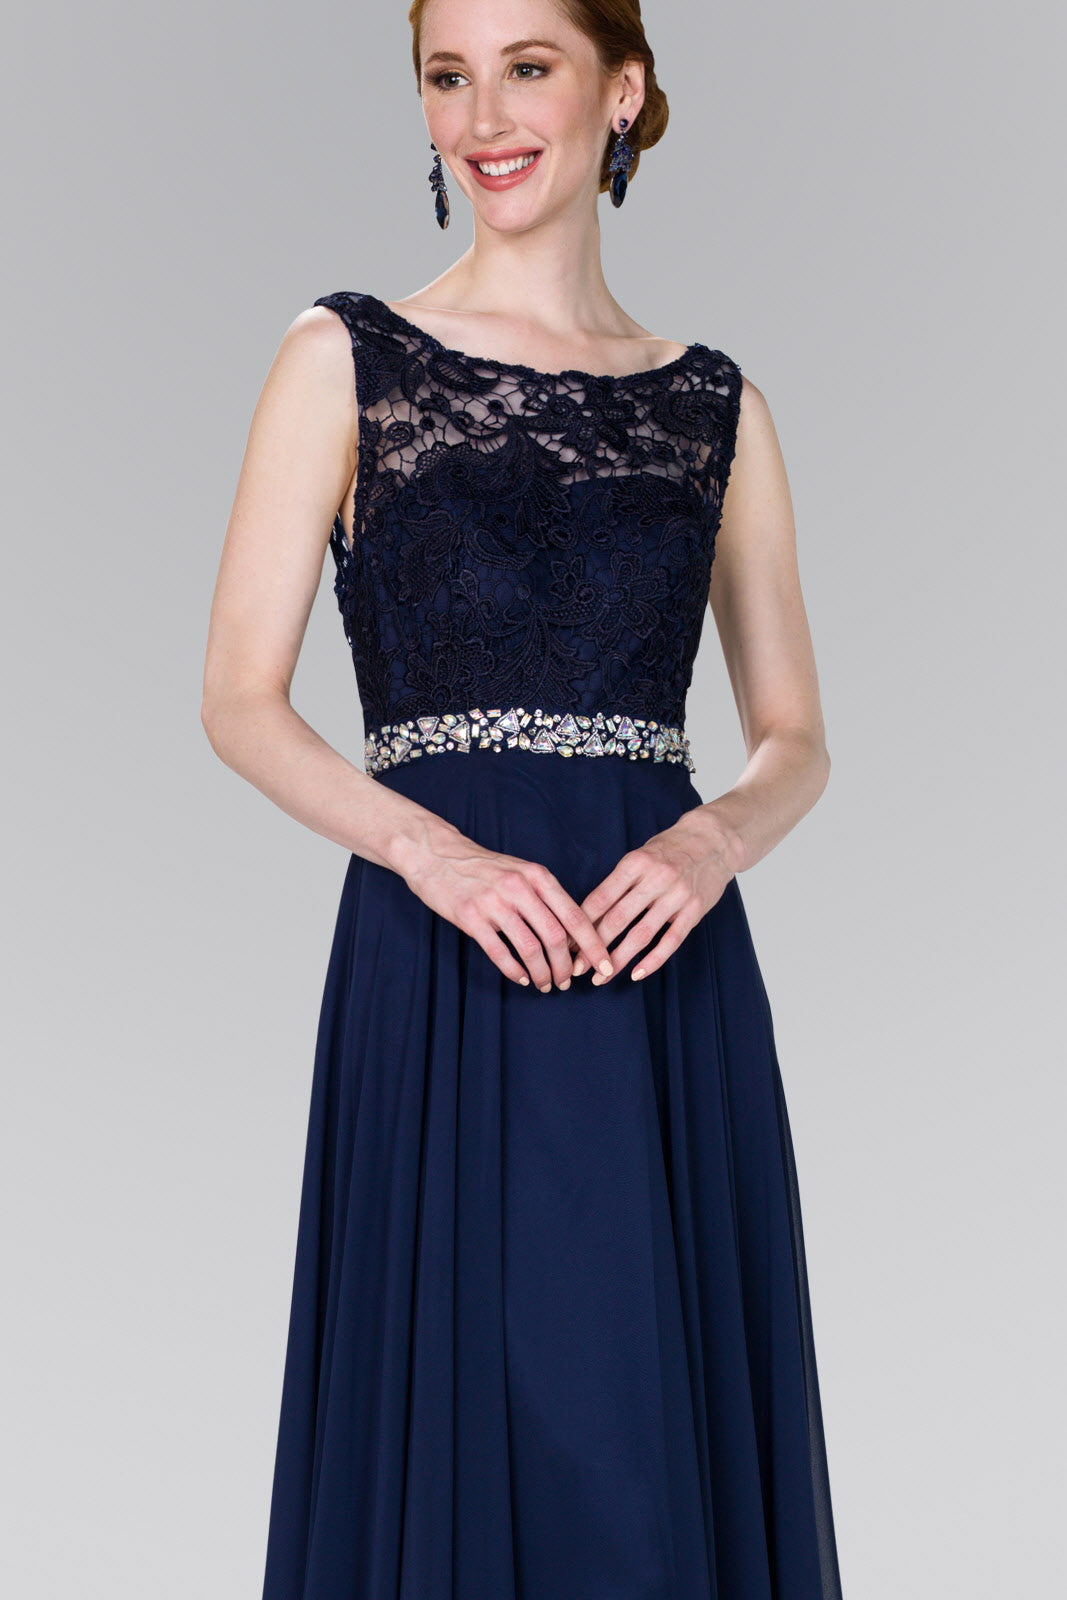 Lace Top Chiffon Long Formal Dress for $135.99 – The Dress Outlet